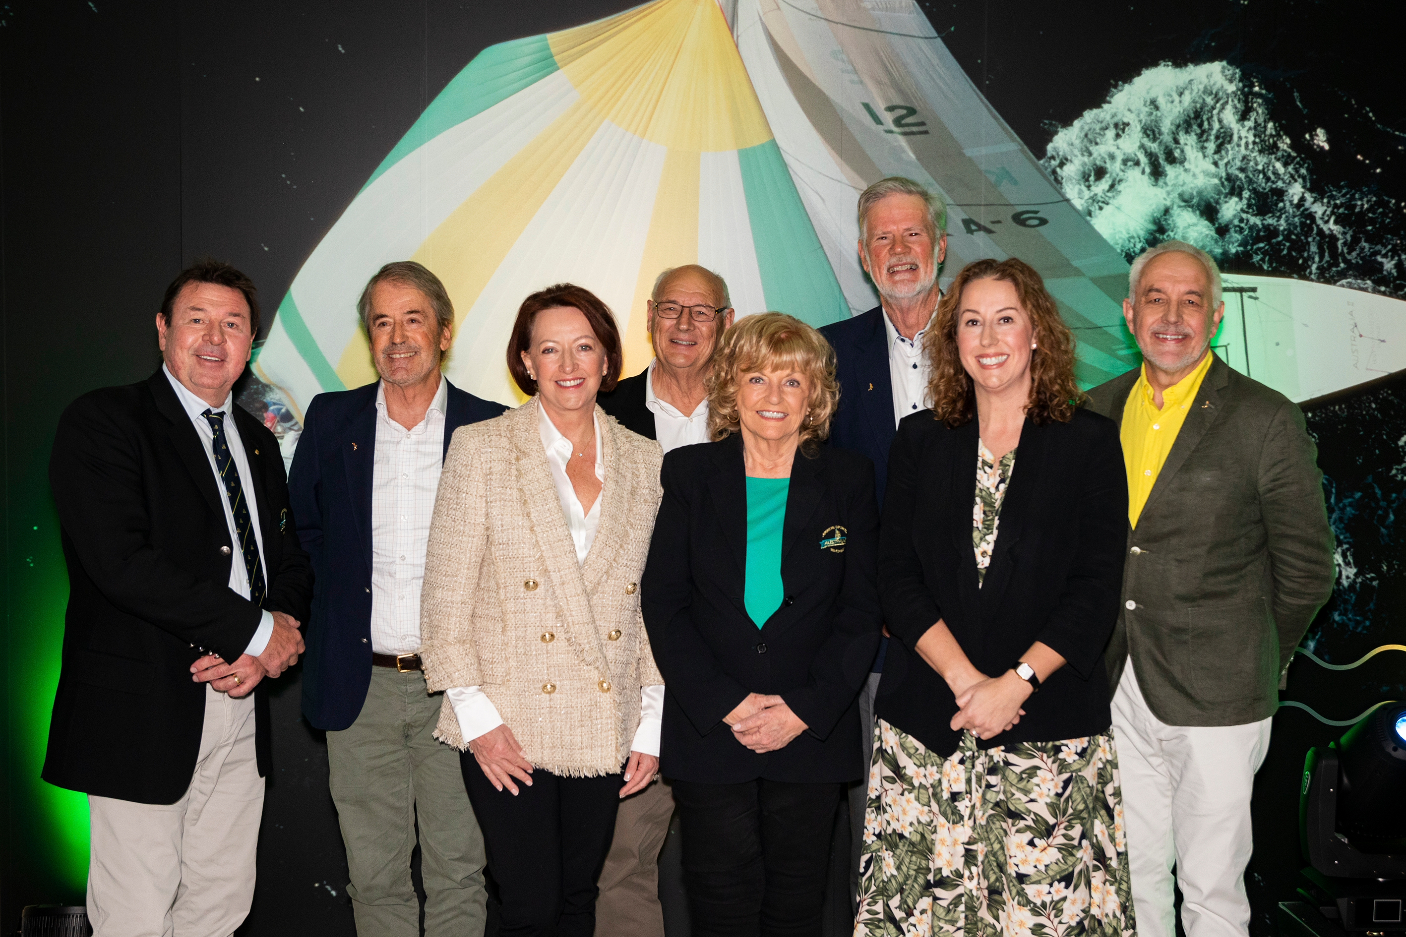 Image contains some of the Australia II crew along with other members including the WA Museum's CEO Alec Coles.